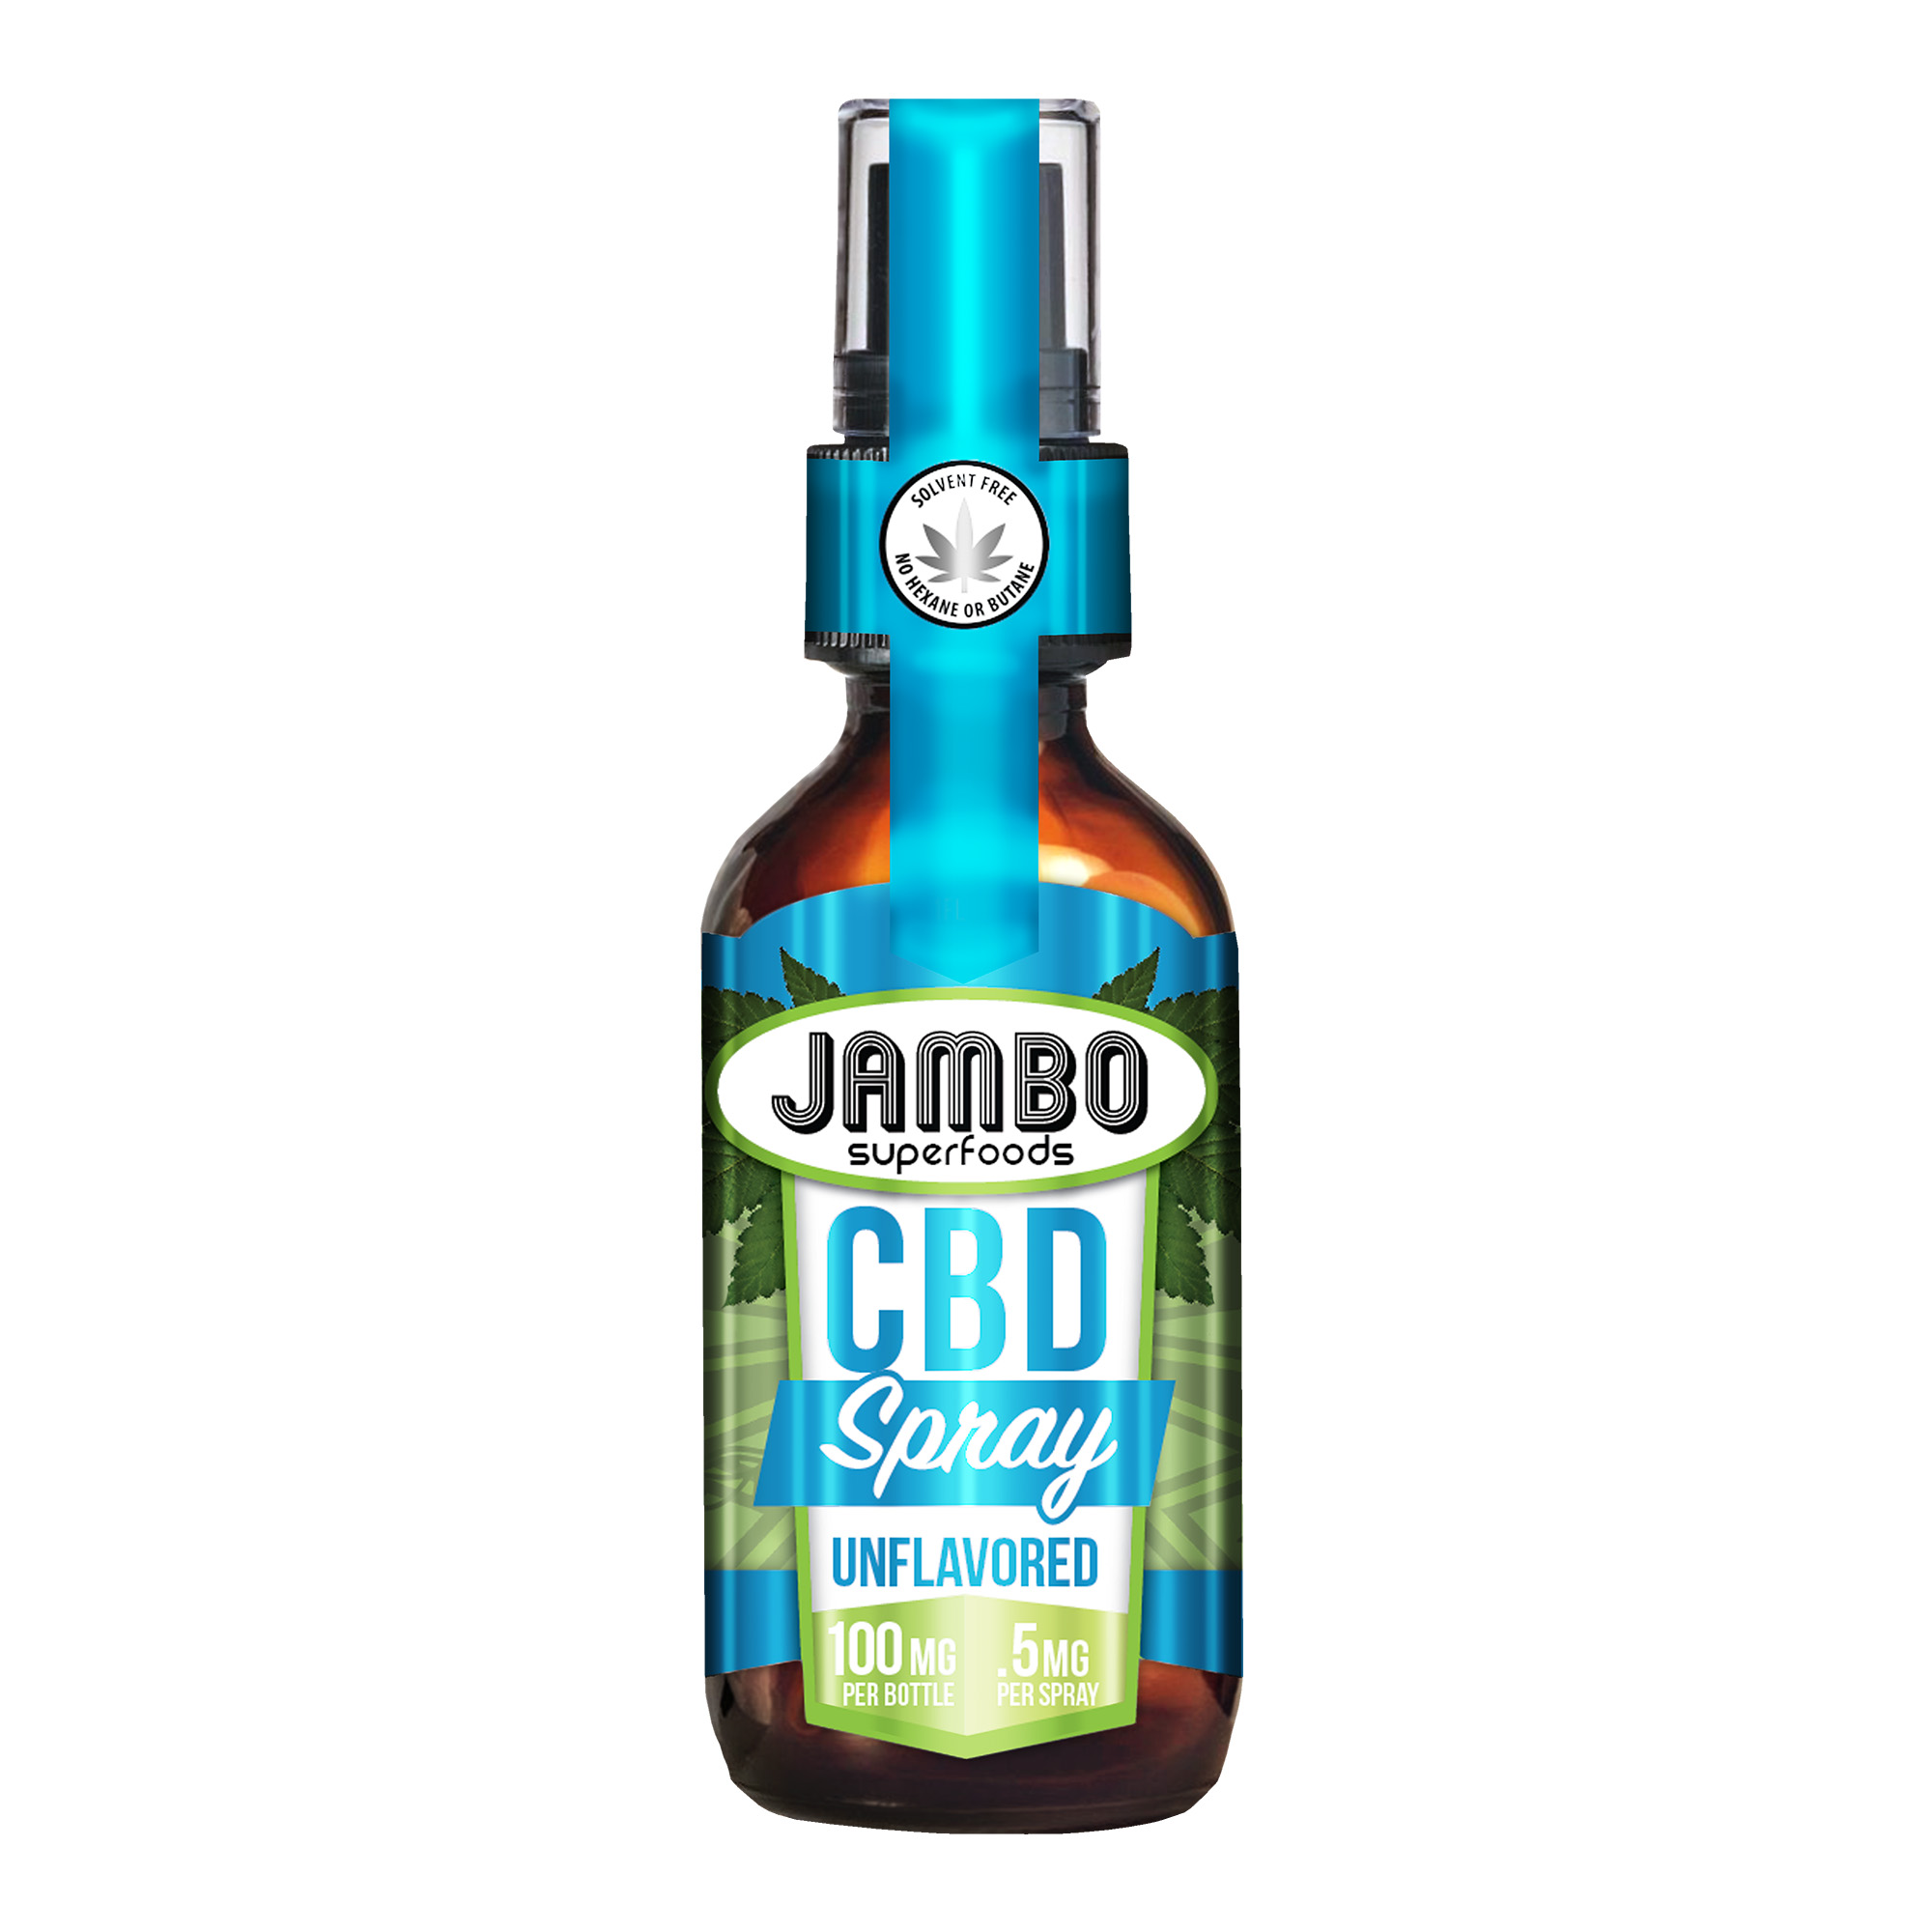 Jambo Superfoods CBD spray unflavored 100mg product image